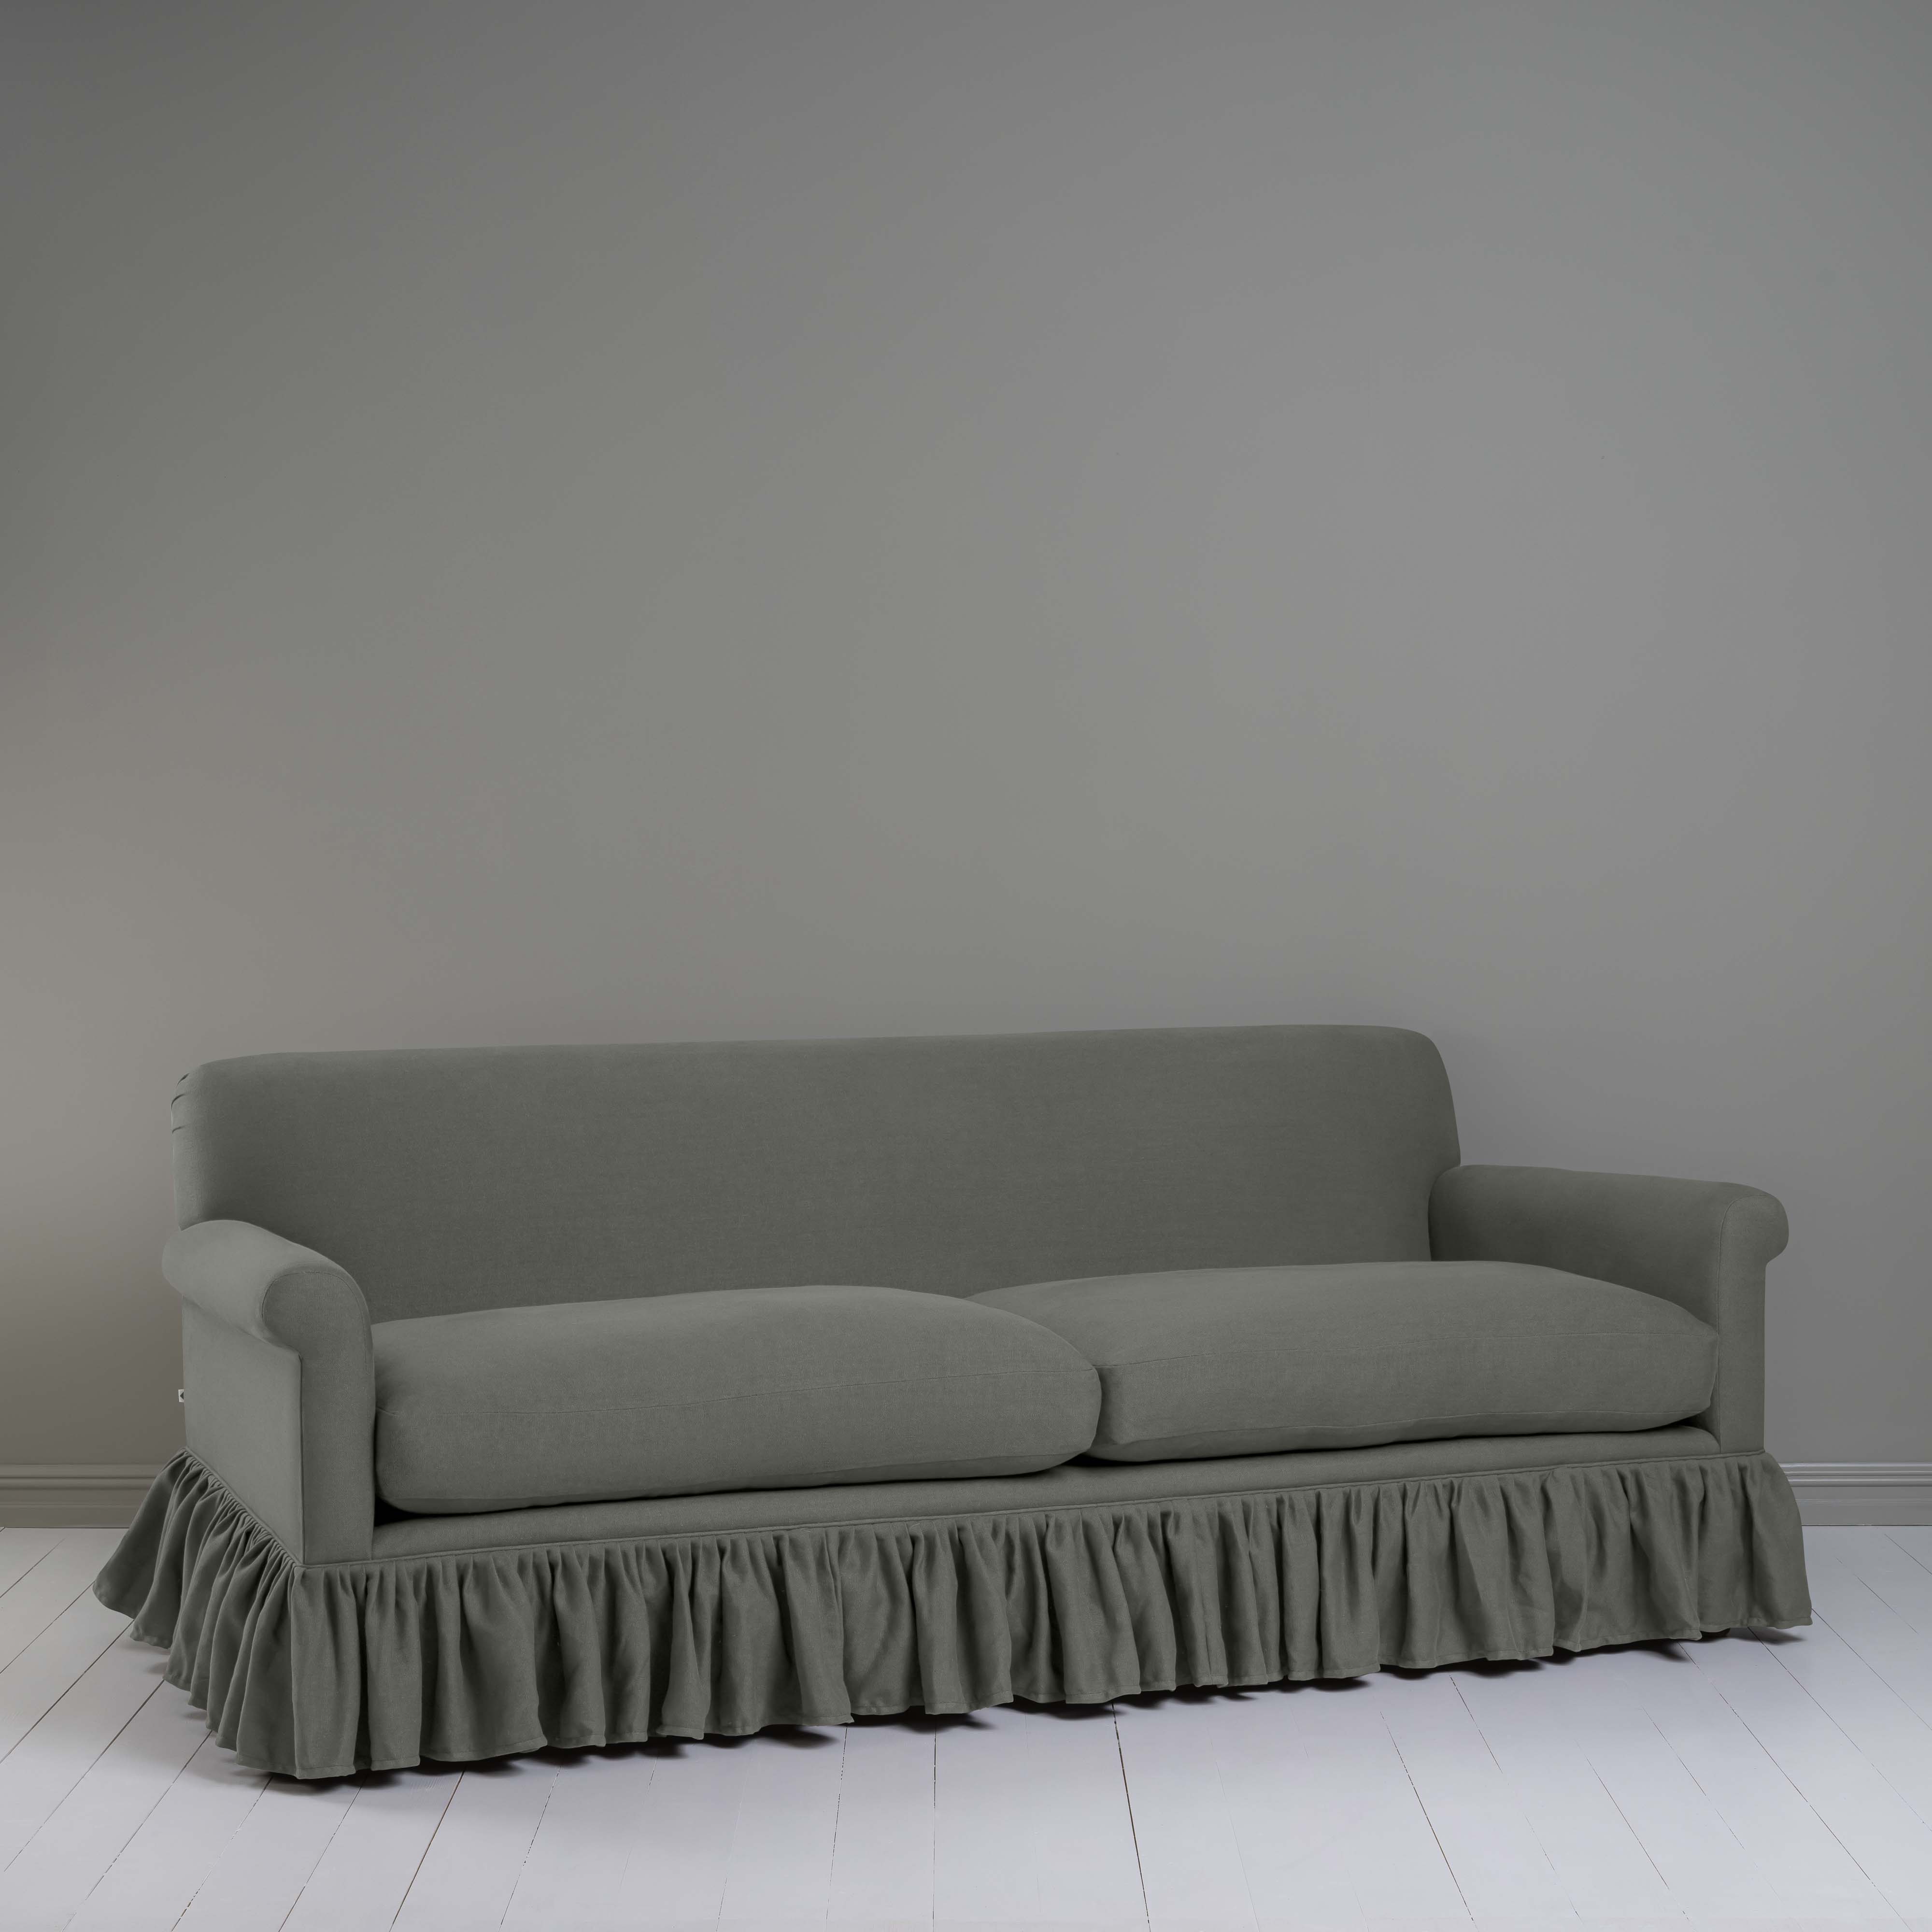  Curtain Call 4 Seater Sofa in Laidback Linen Shadow 